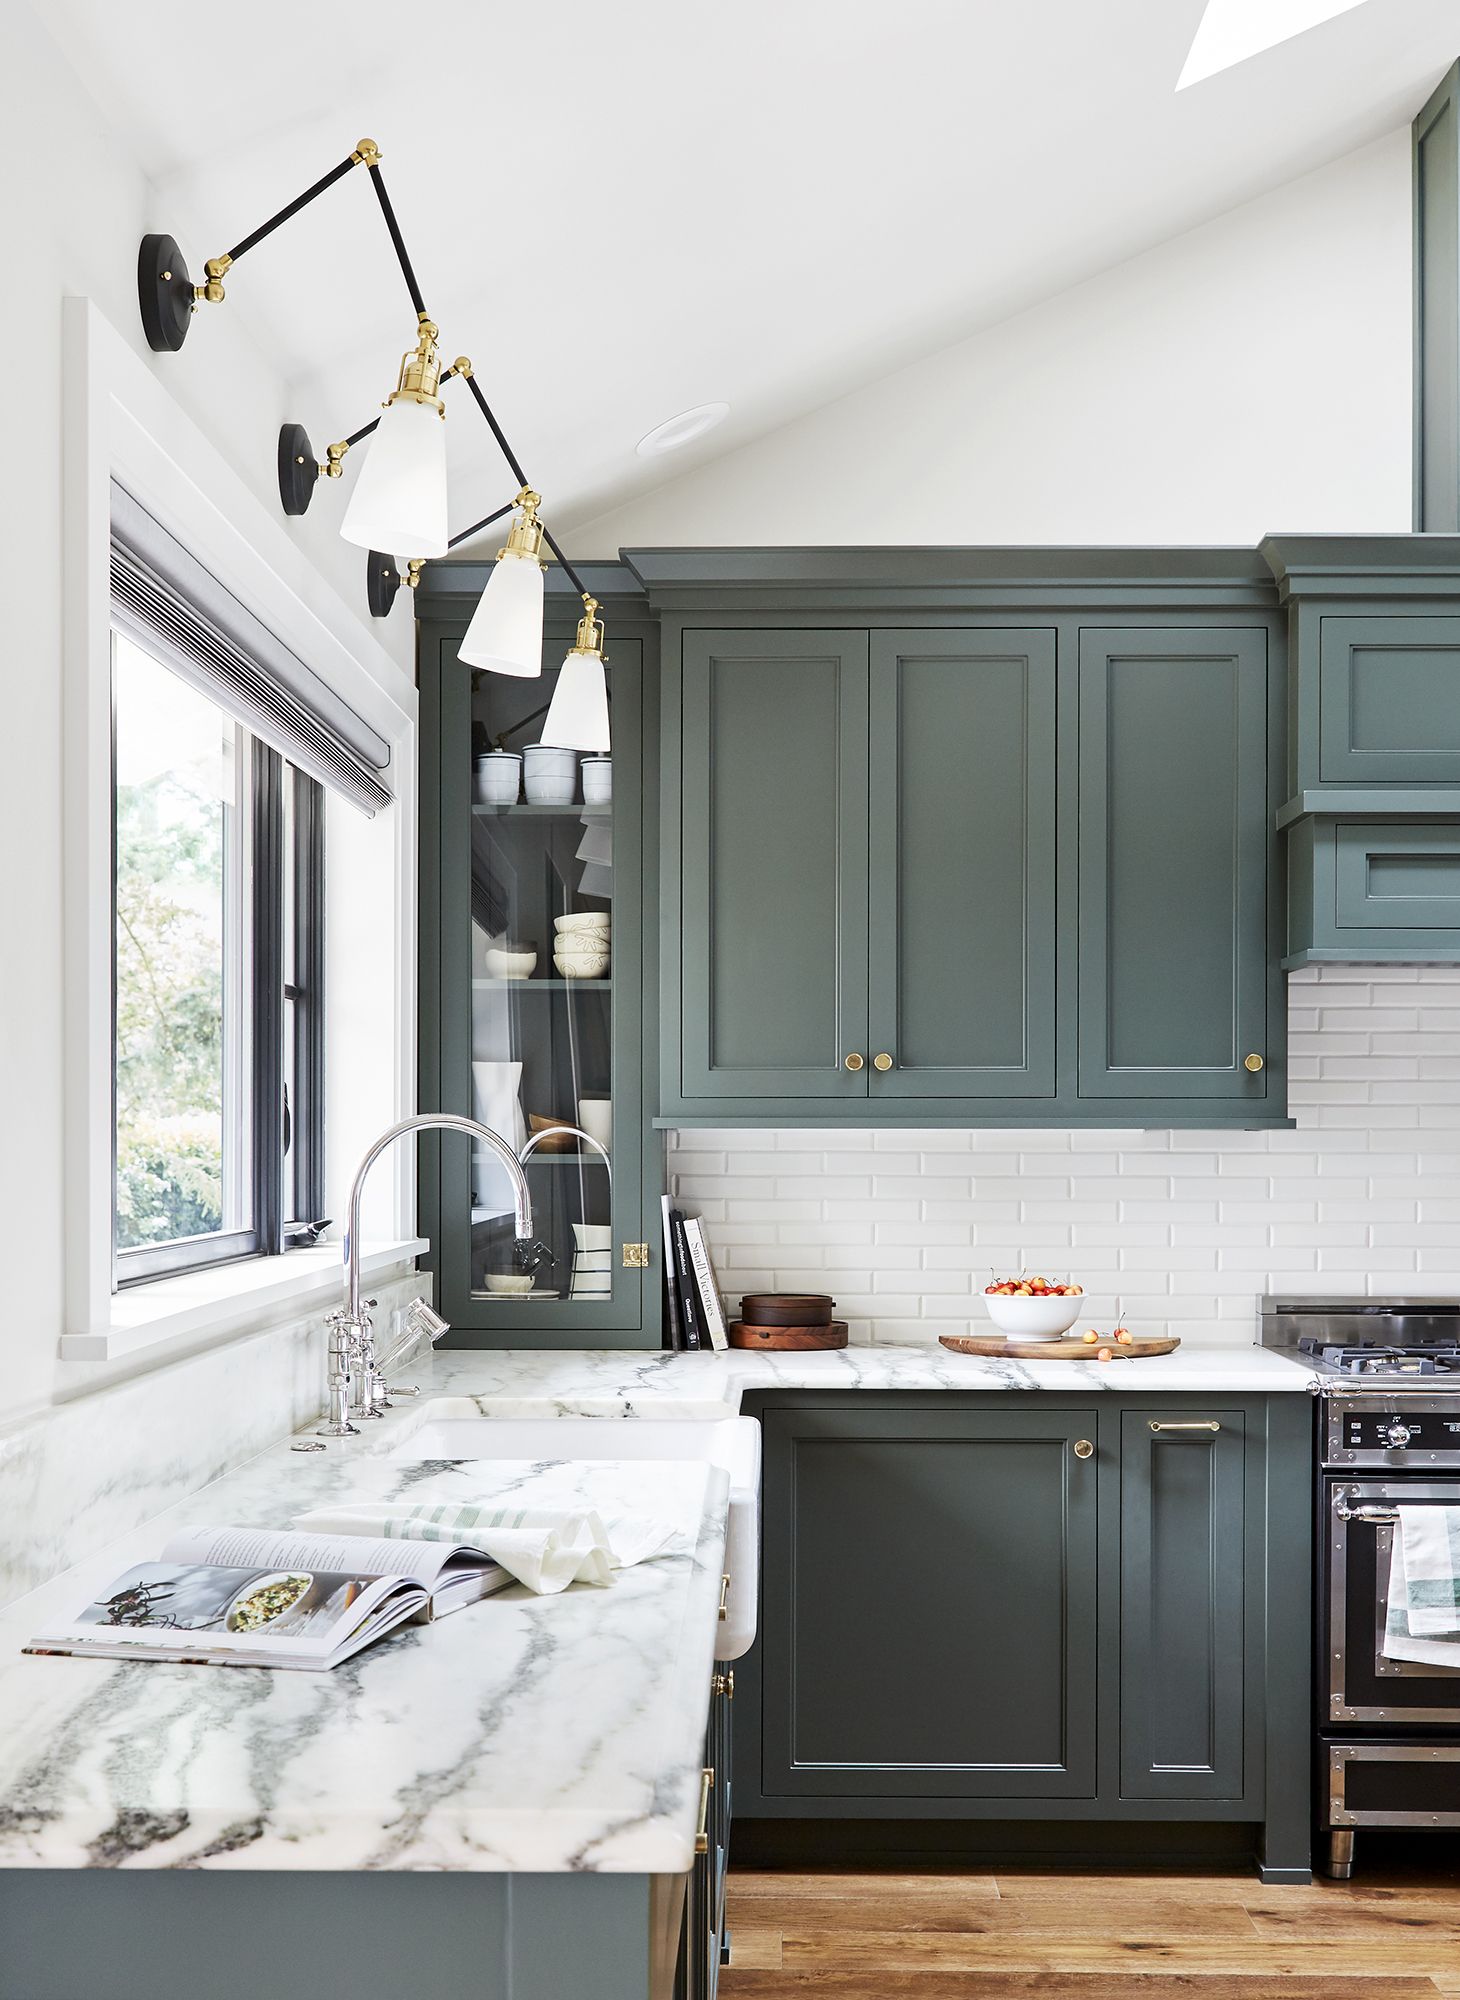 How To Paint Your Kitchen Cabinets, Can I Paint Old Kitchen Cabinets